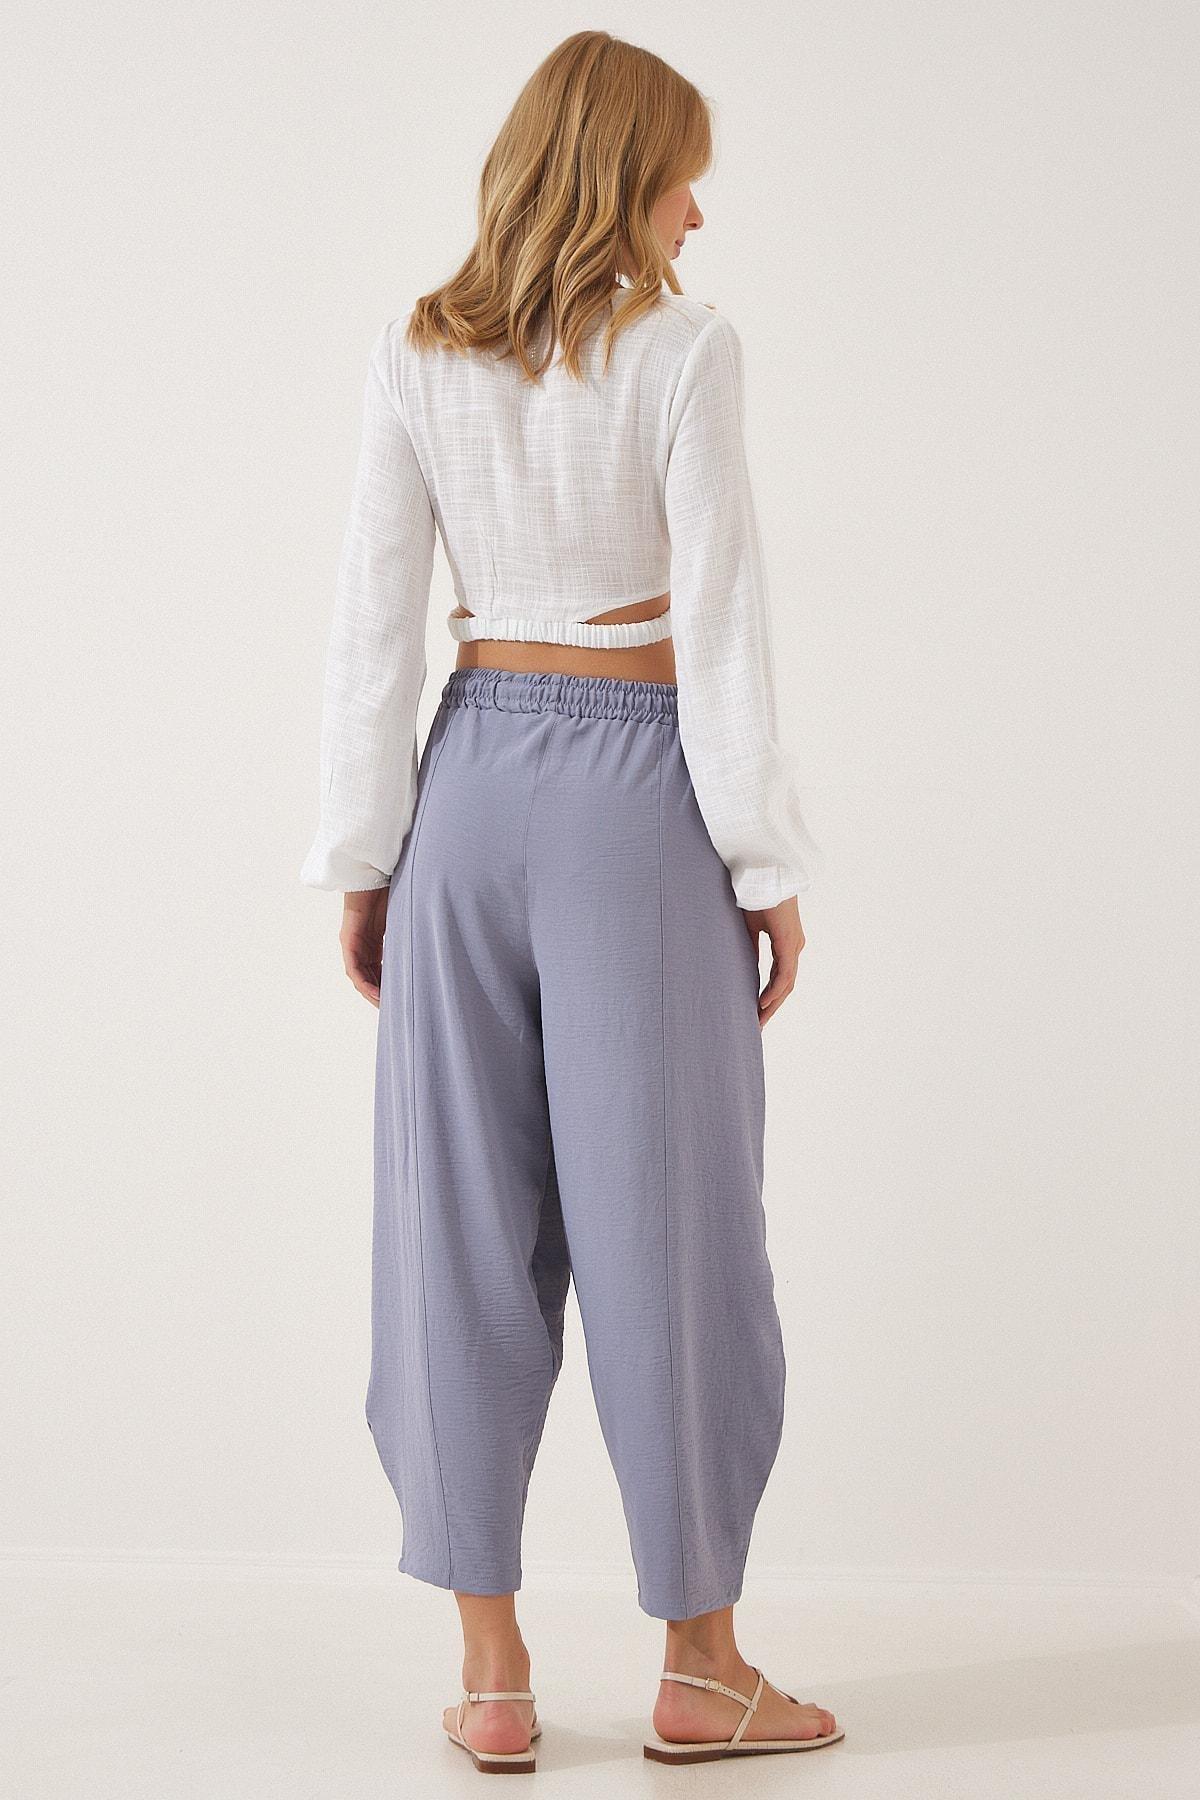 Happiness Istanbul - Grey Mid Waist Carrot Pants